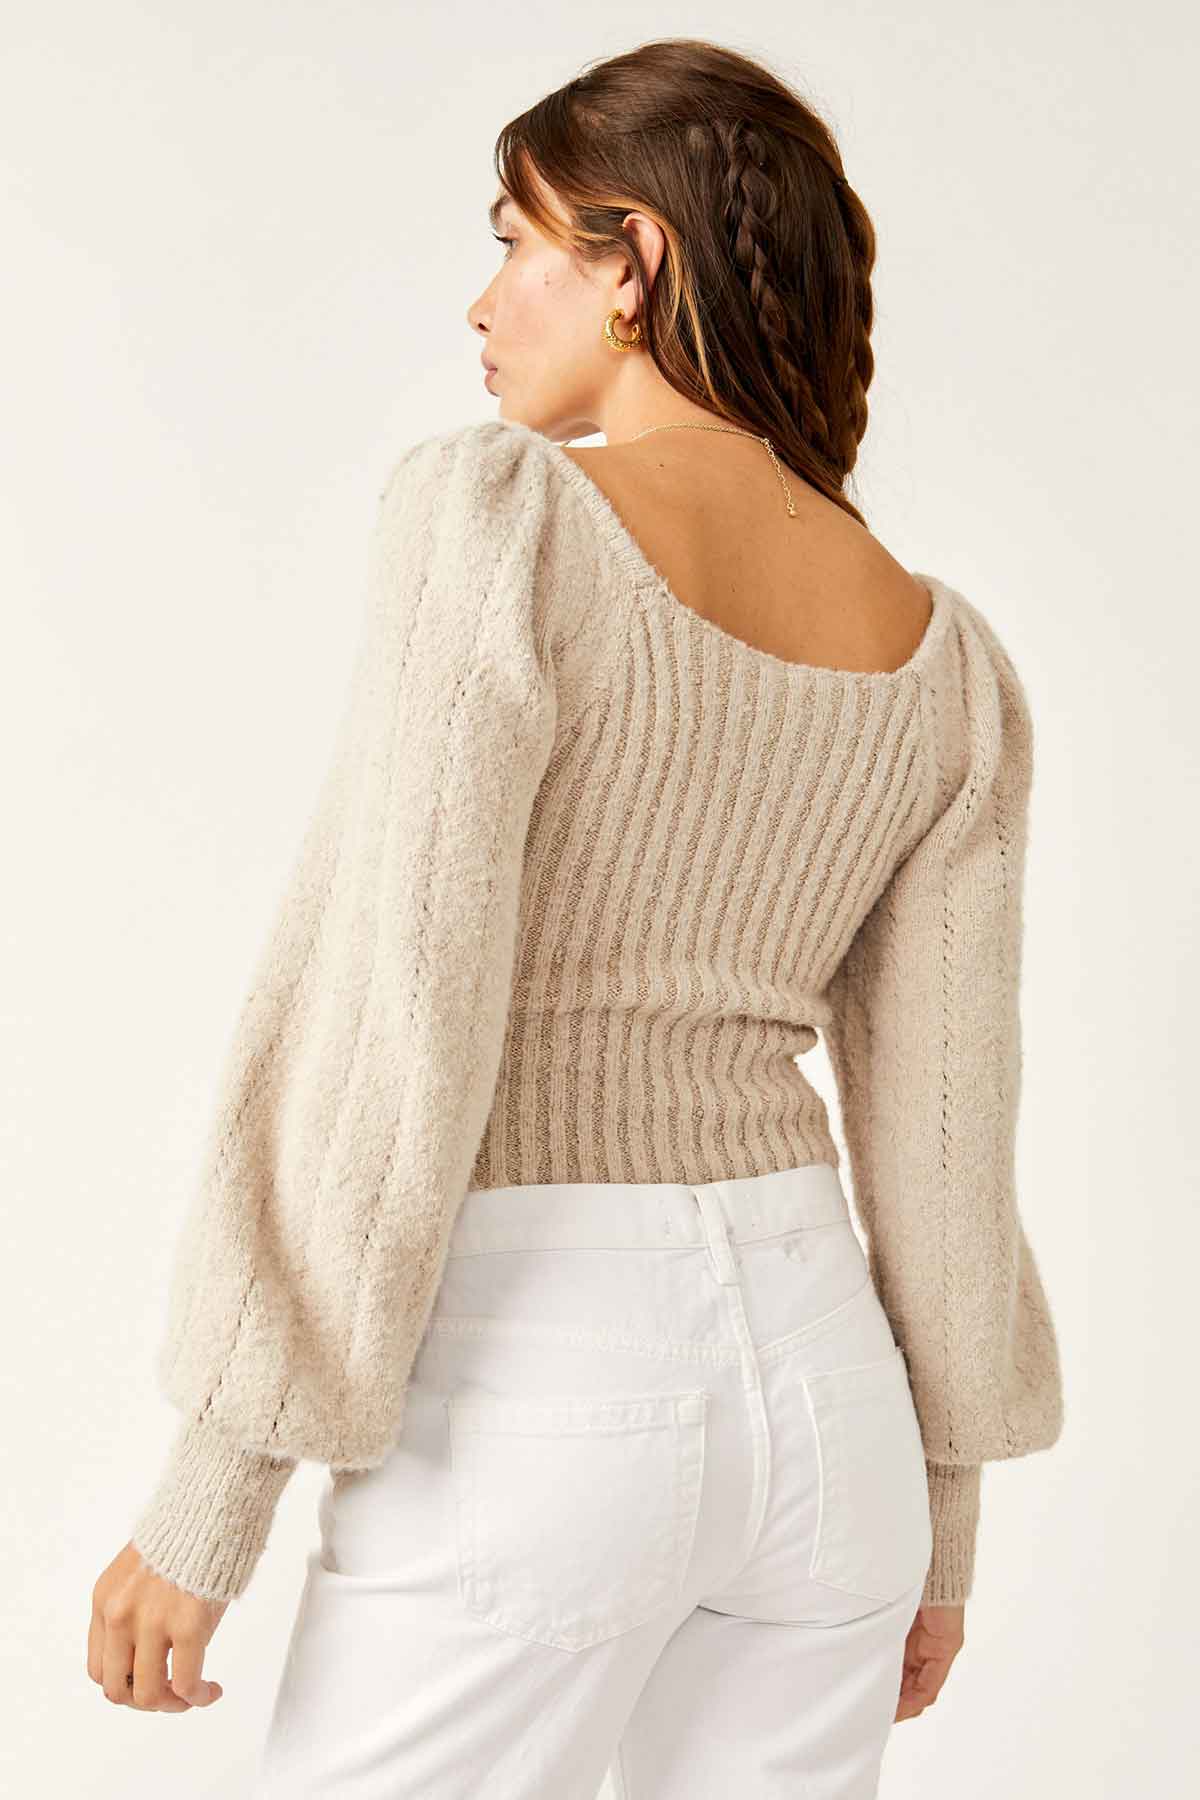 Free People - Katie Pullover - Sand Dollar Combo - Back